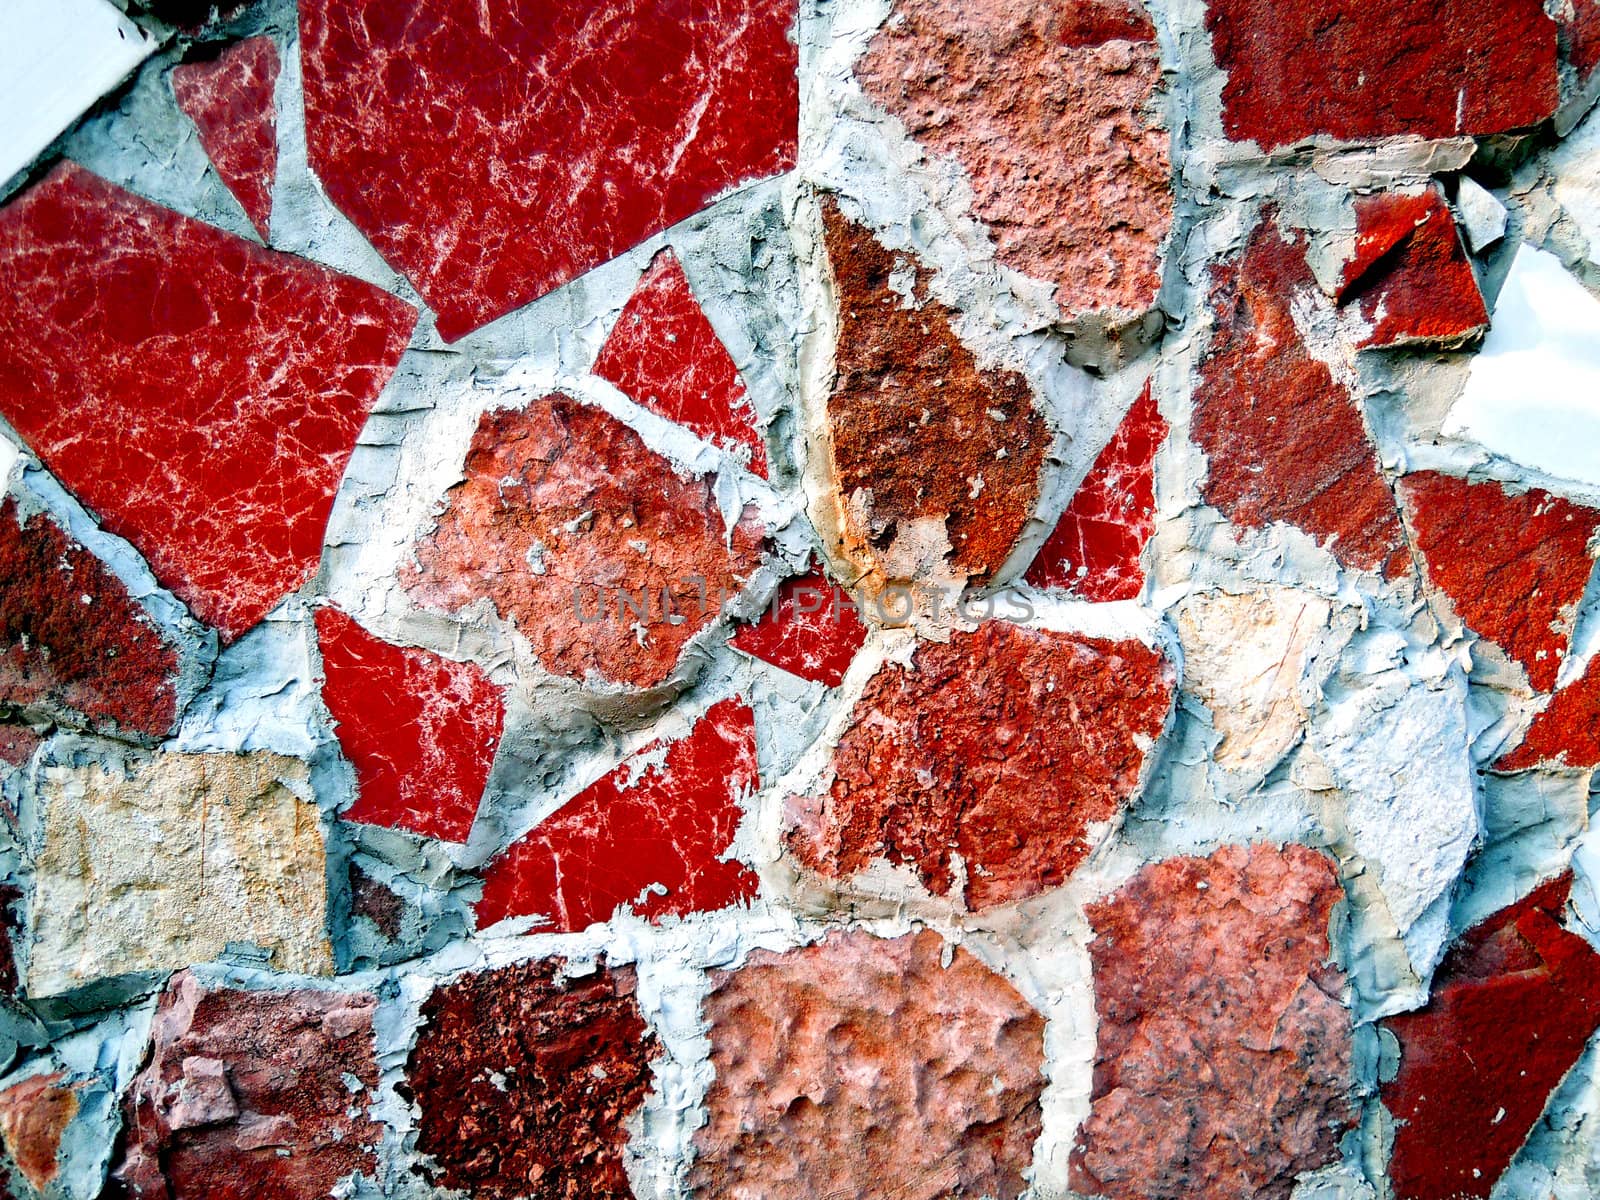  Red Tiles and stone background